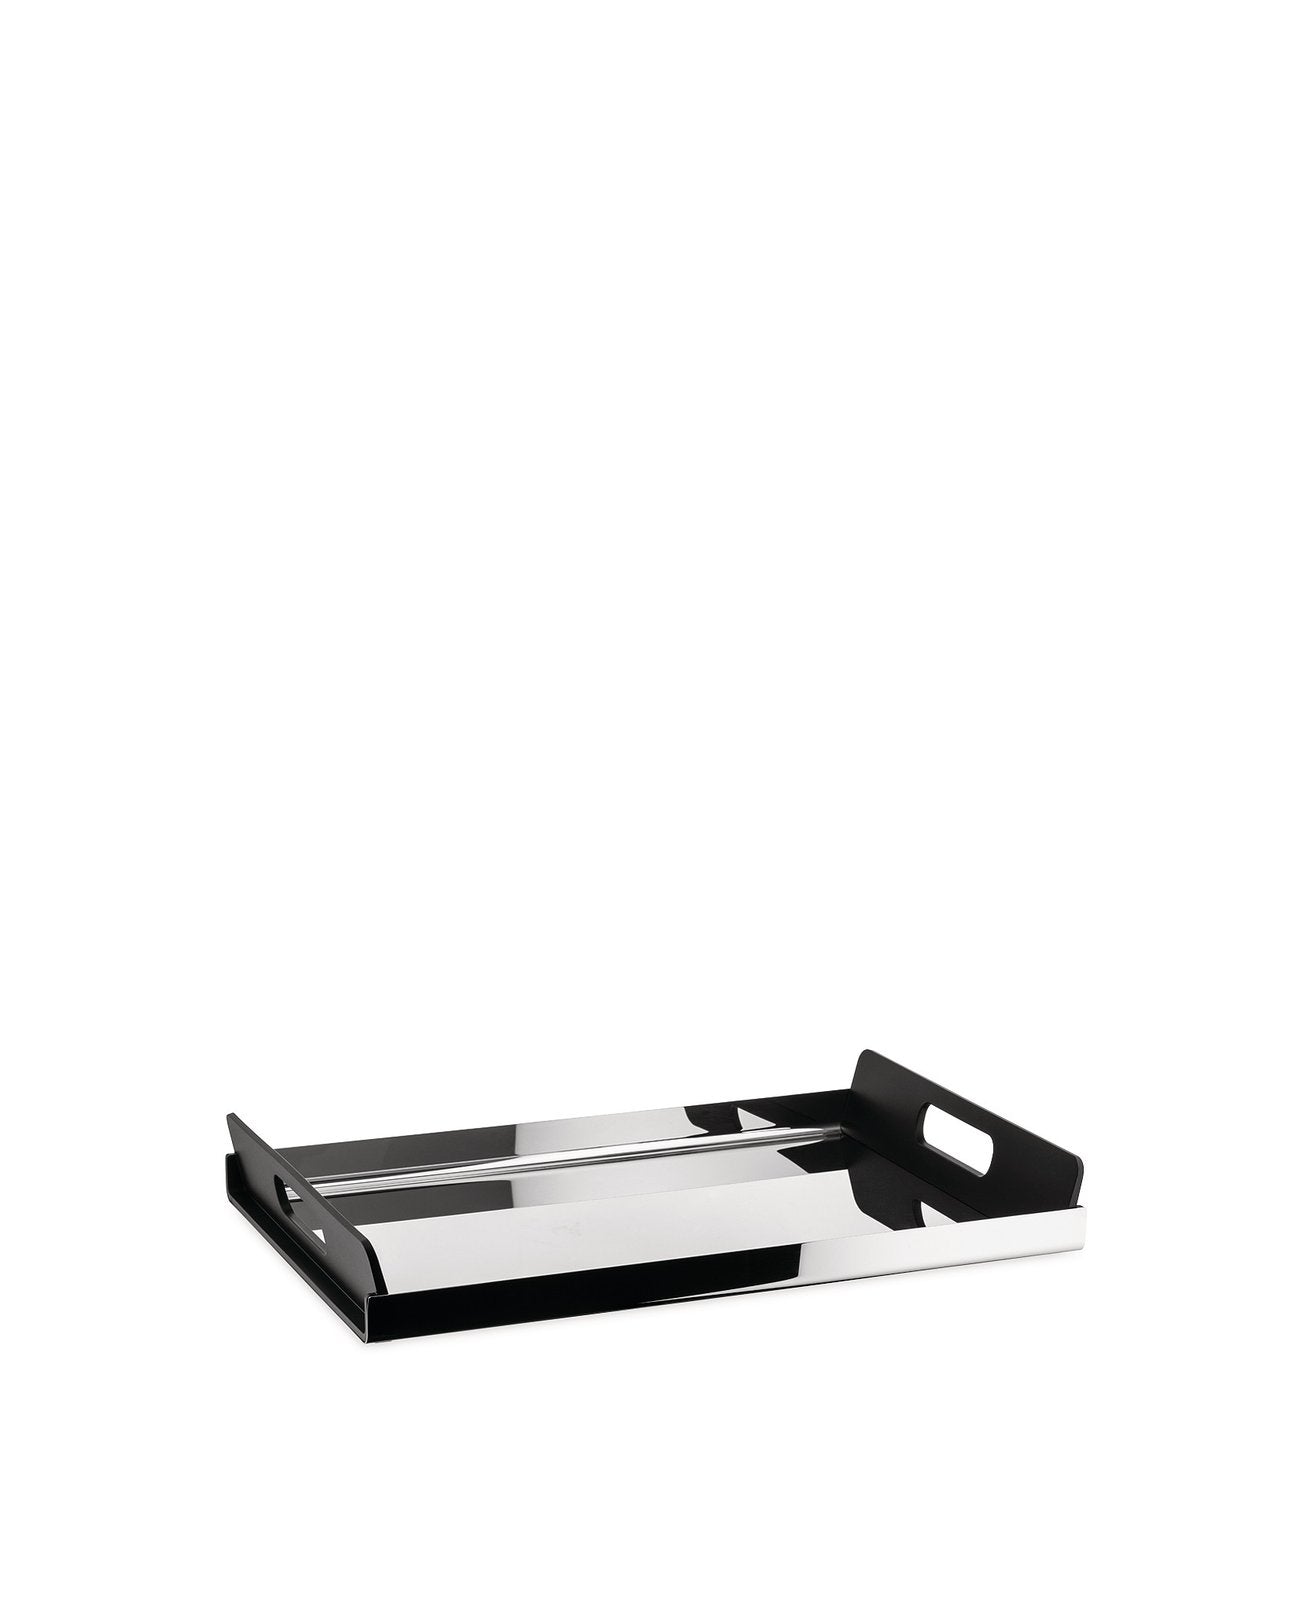 Alessi Serving Tray with Black Handles VASSILY | Panik Design